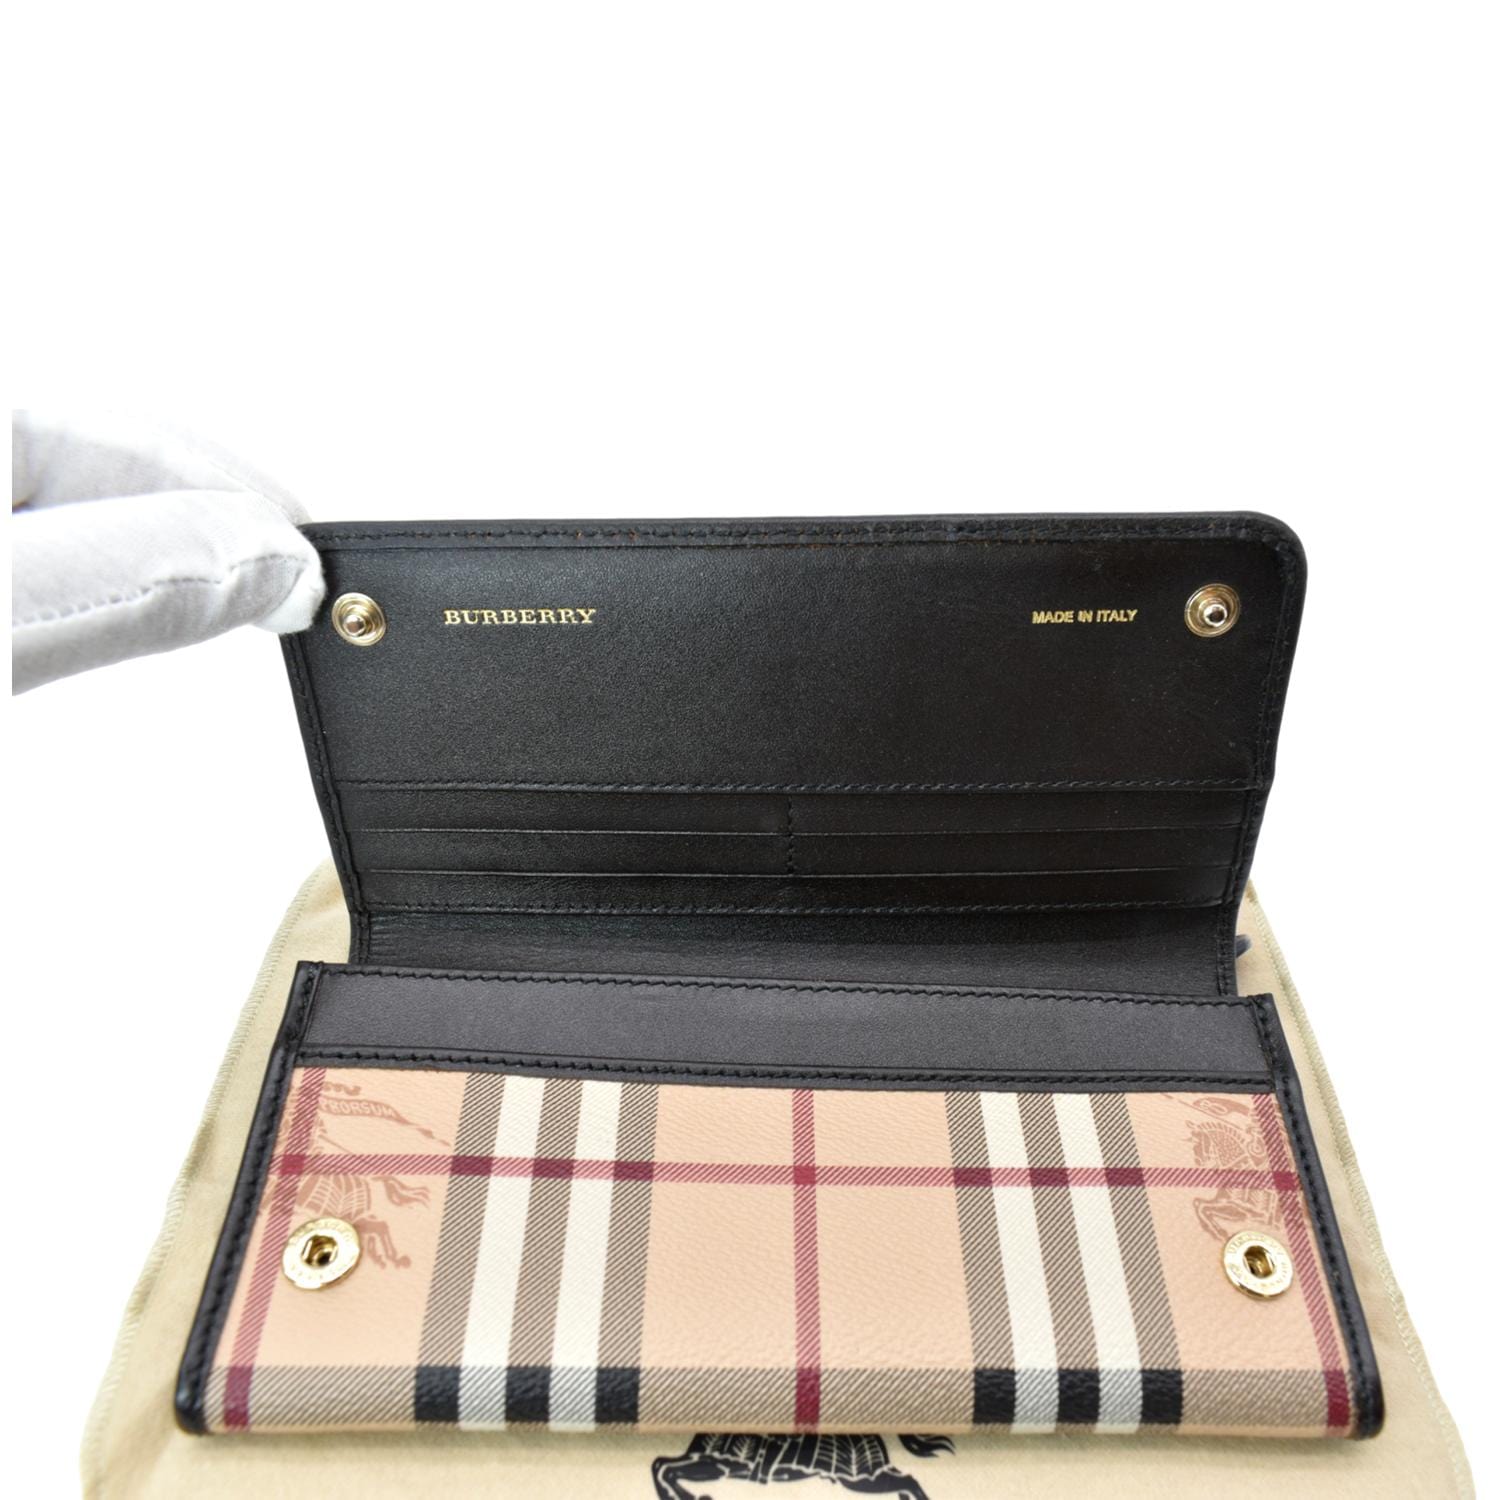 Wallets & purses Burberry - Lila Vintage Check and black leather wallet -  8026114